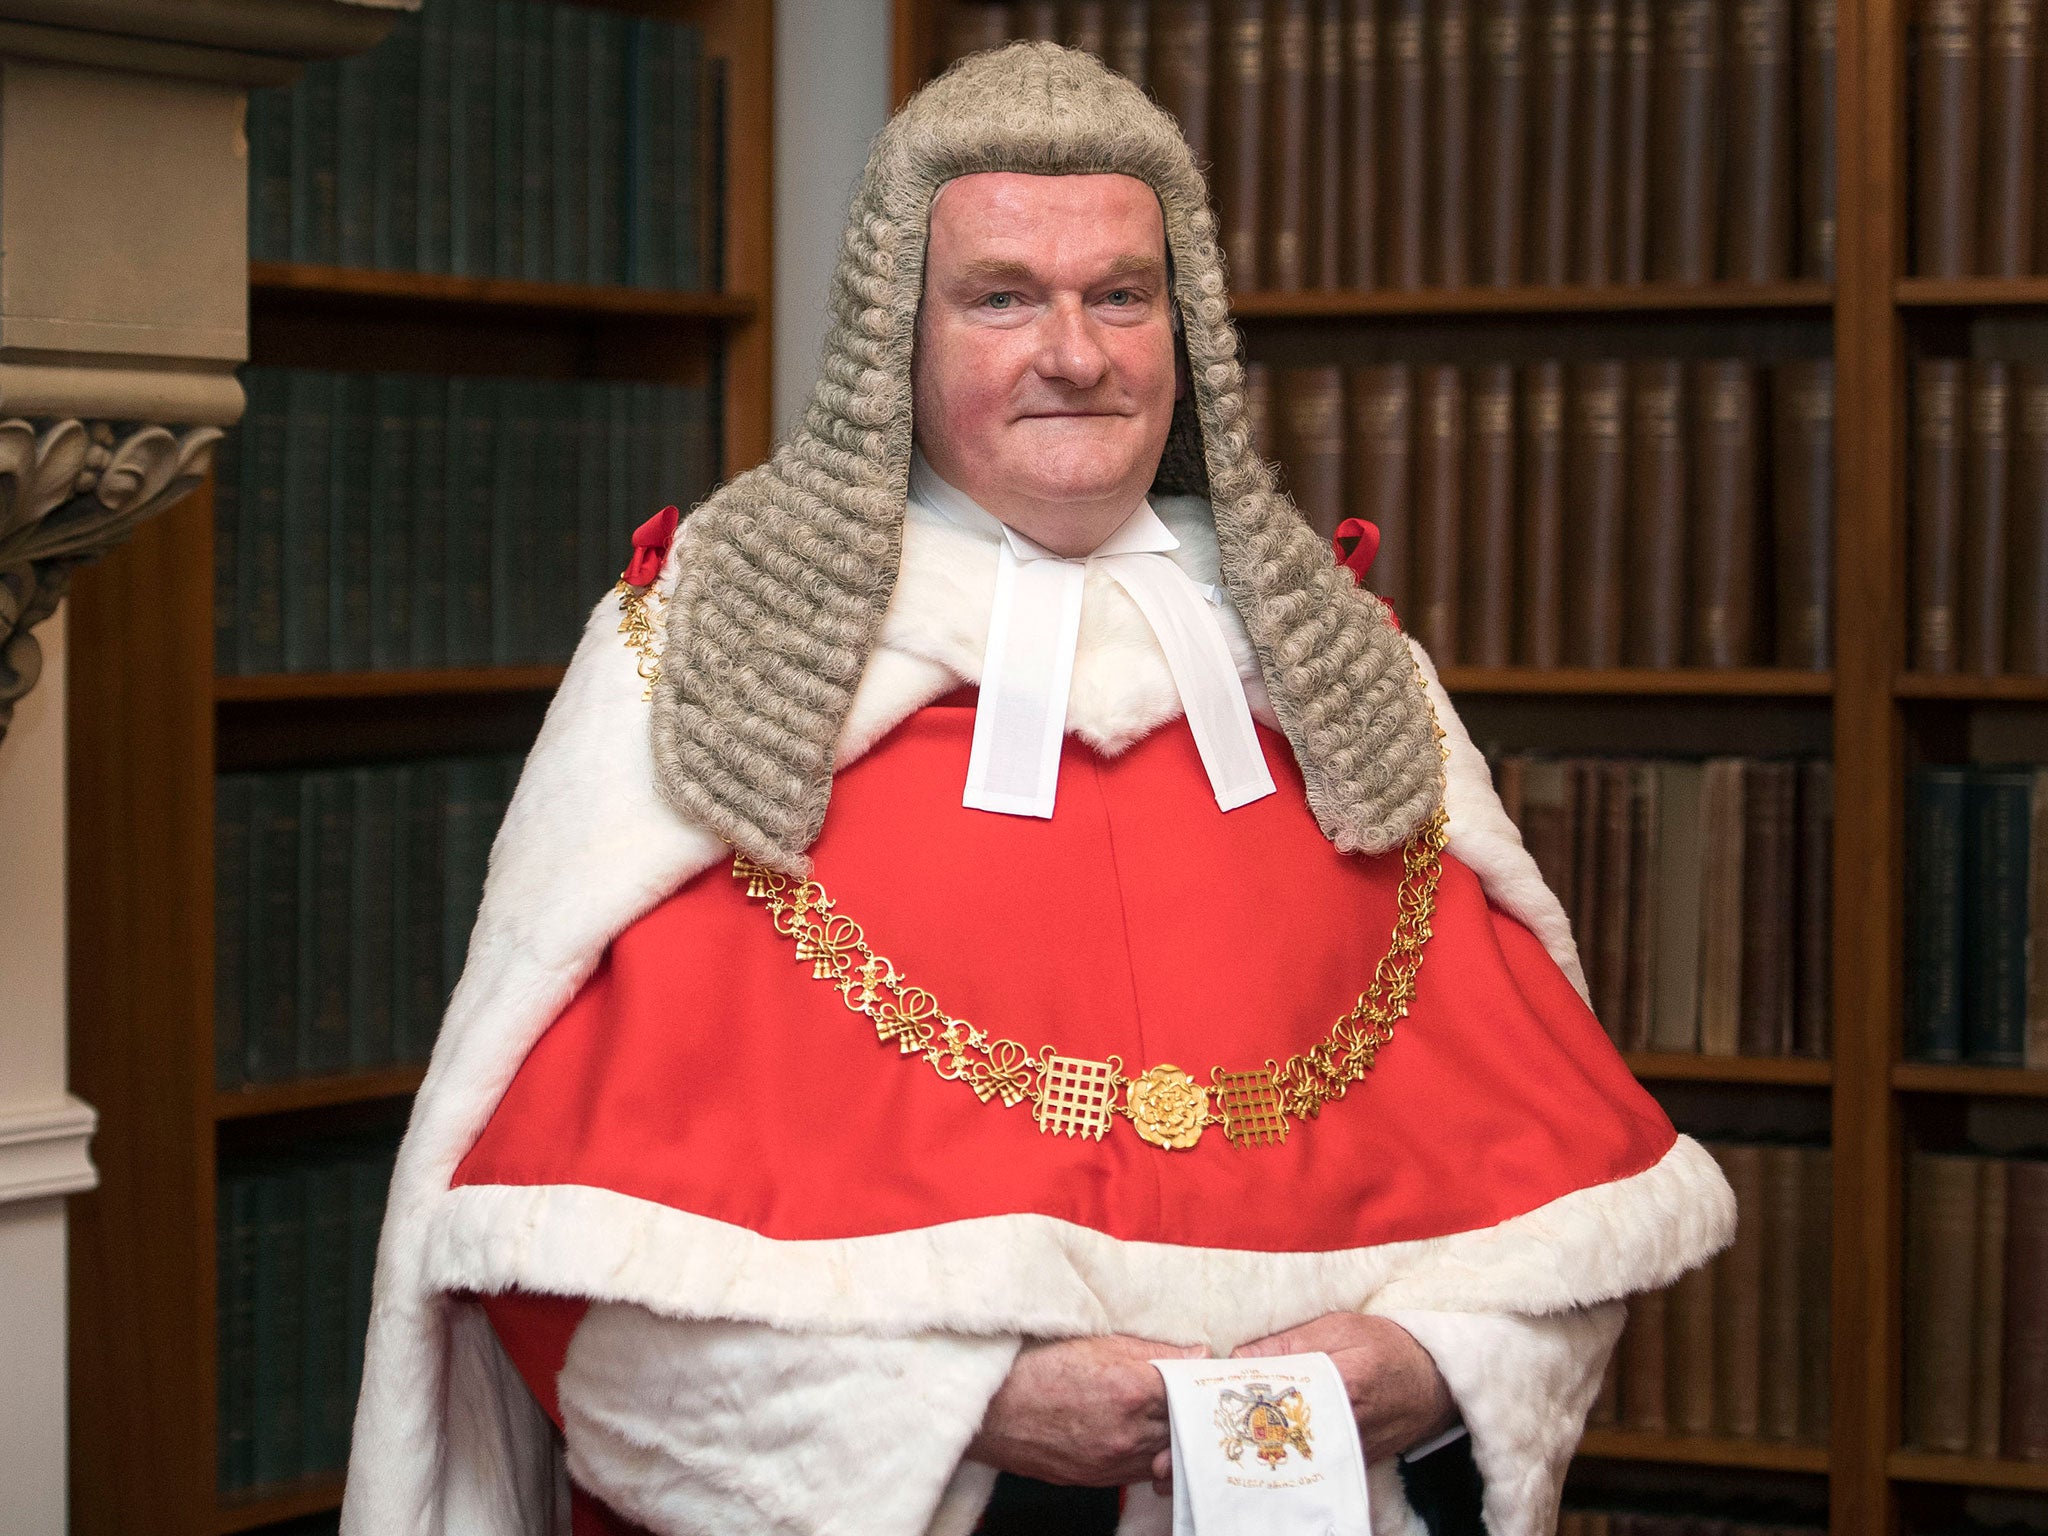 The Lord Chief Justice, Lord Burnett of Maldon, at the Royal Courts of Justice